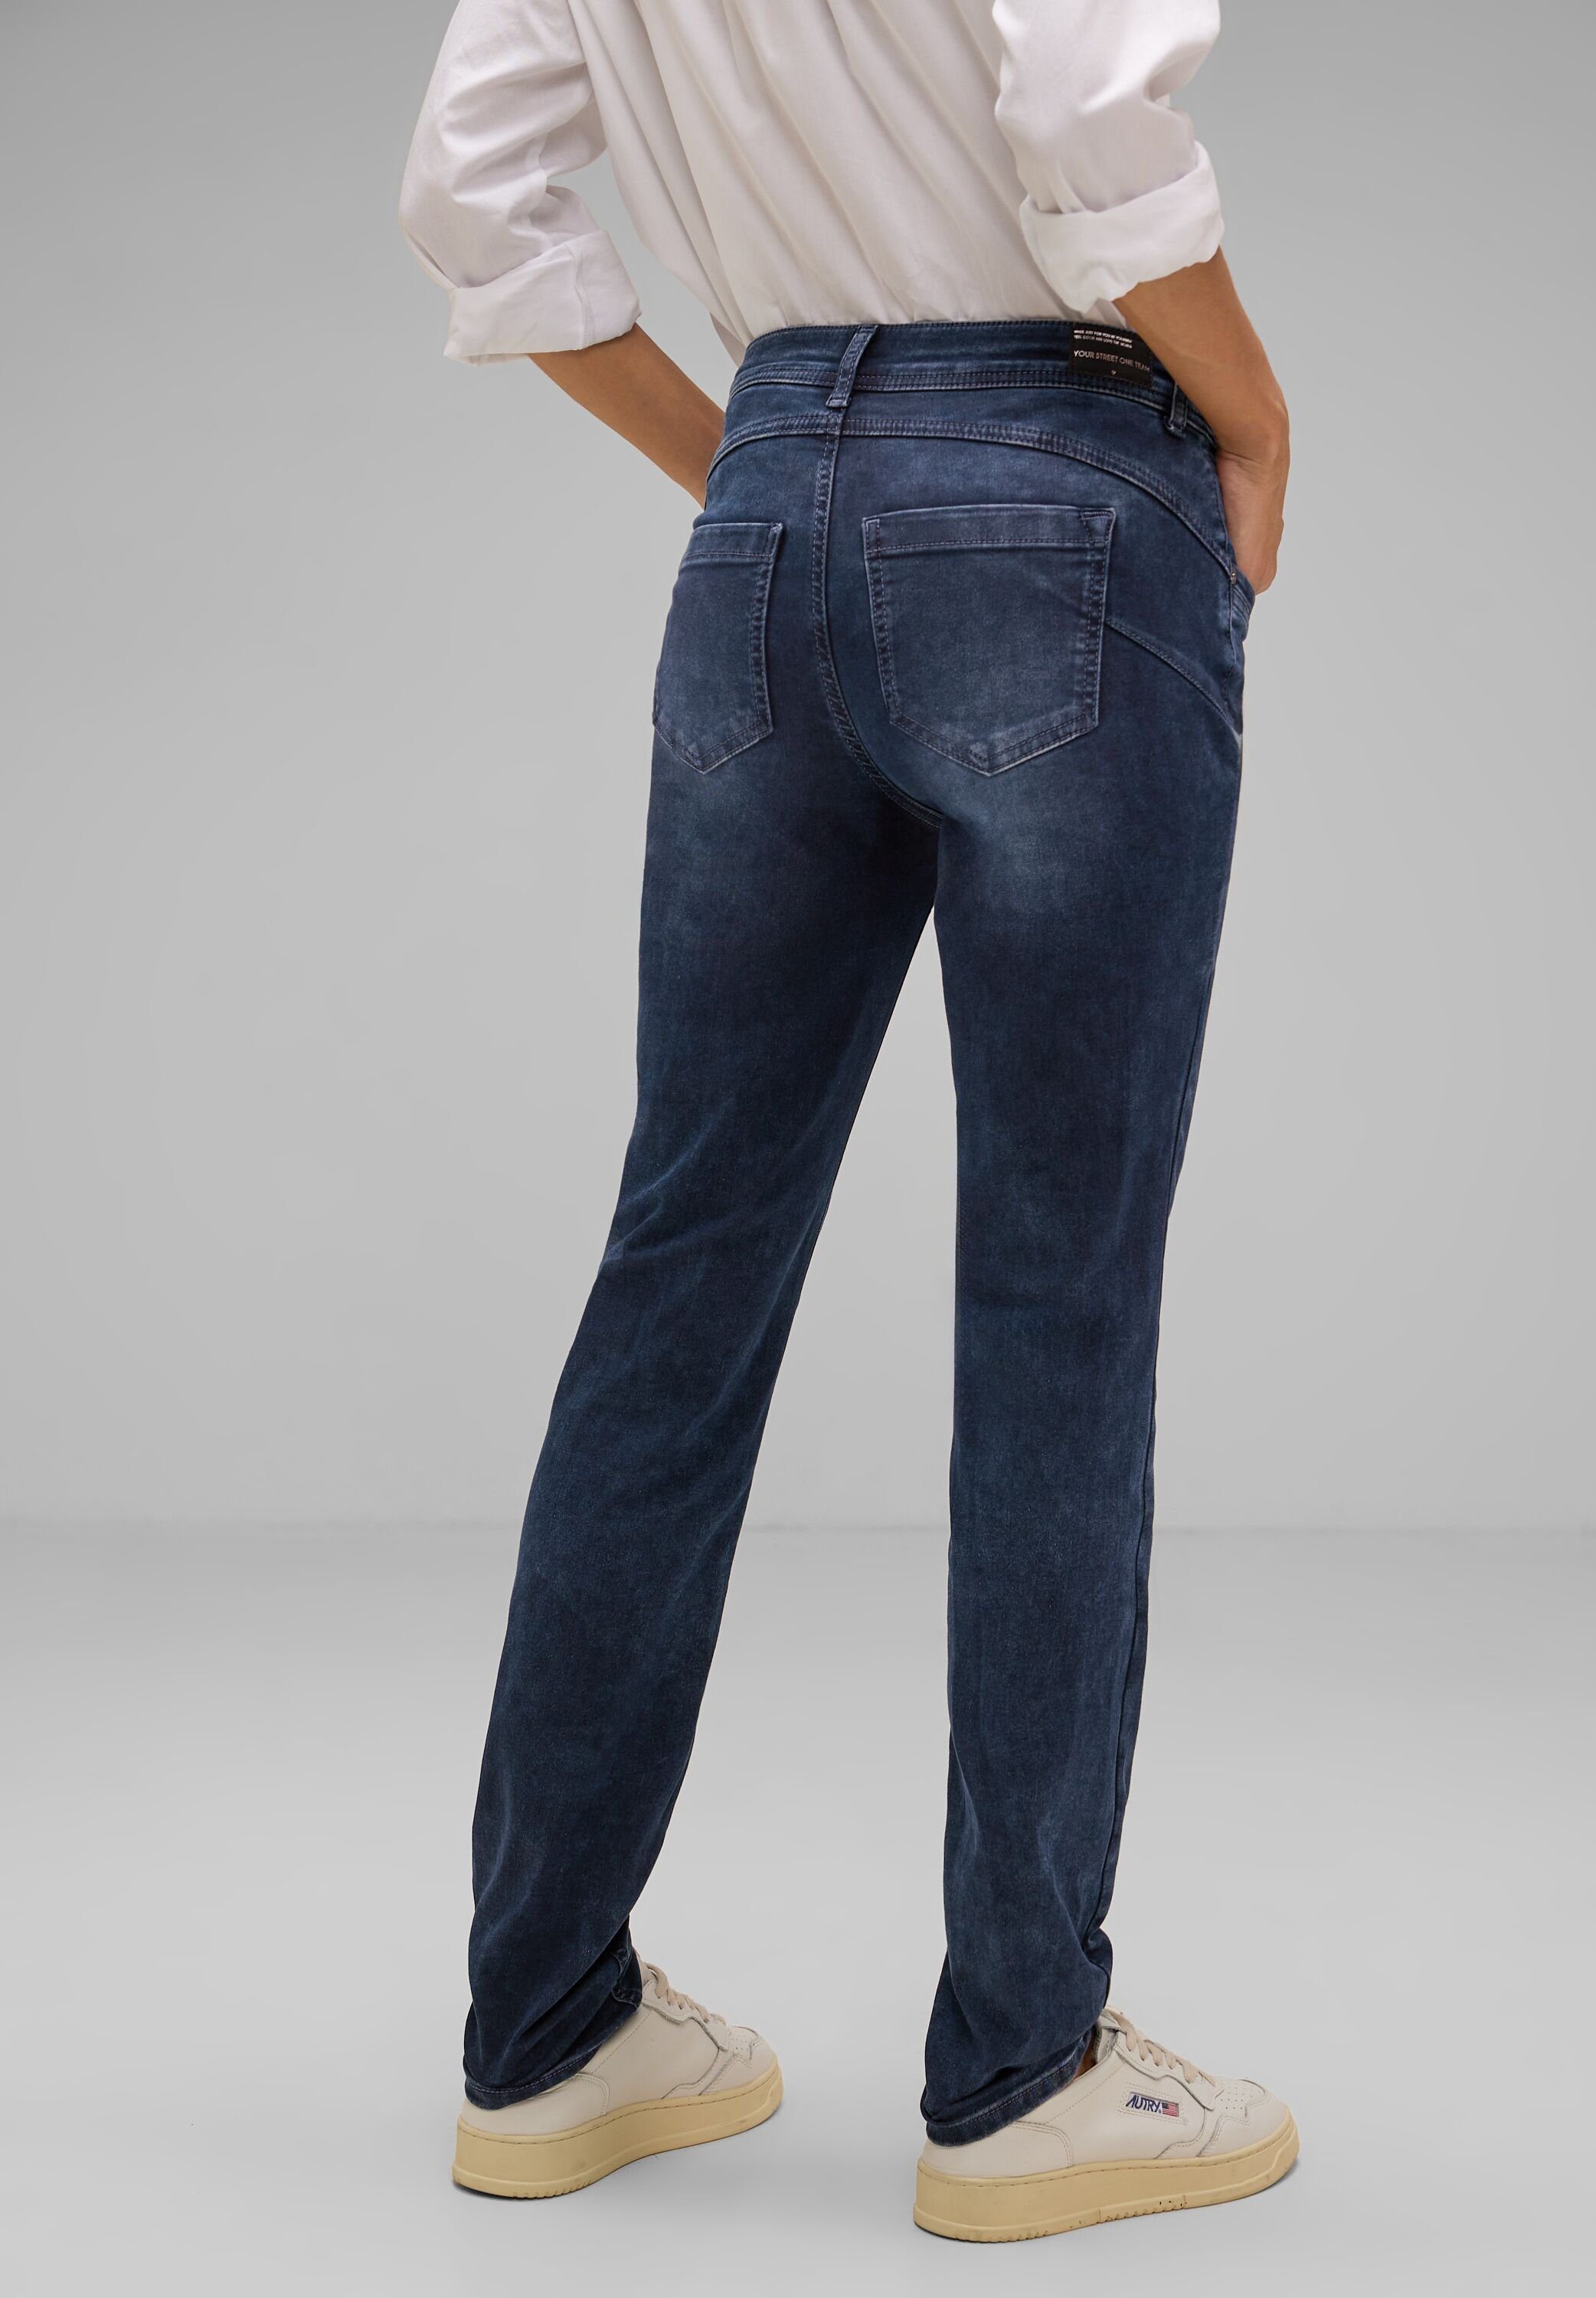 Jeans STREET Waist Middle ONE Gerade